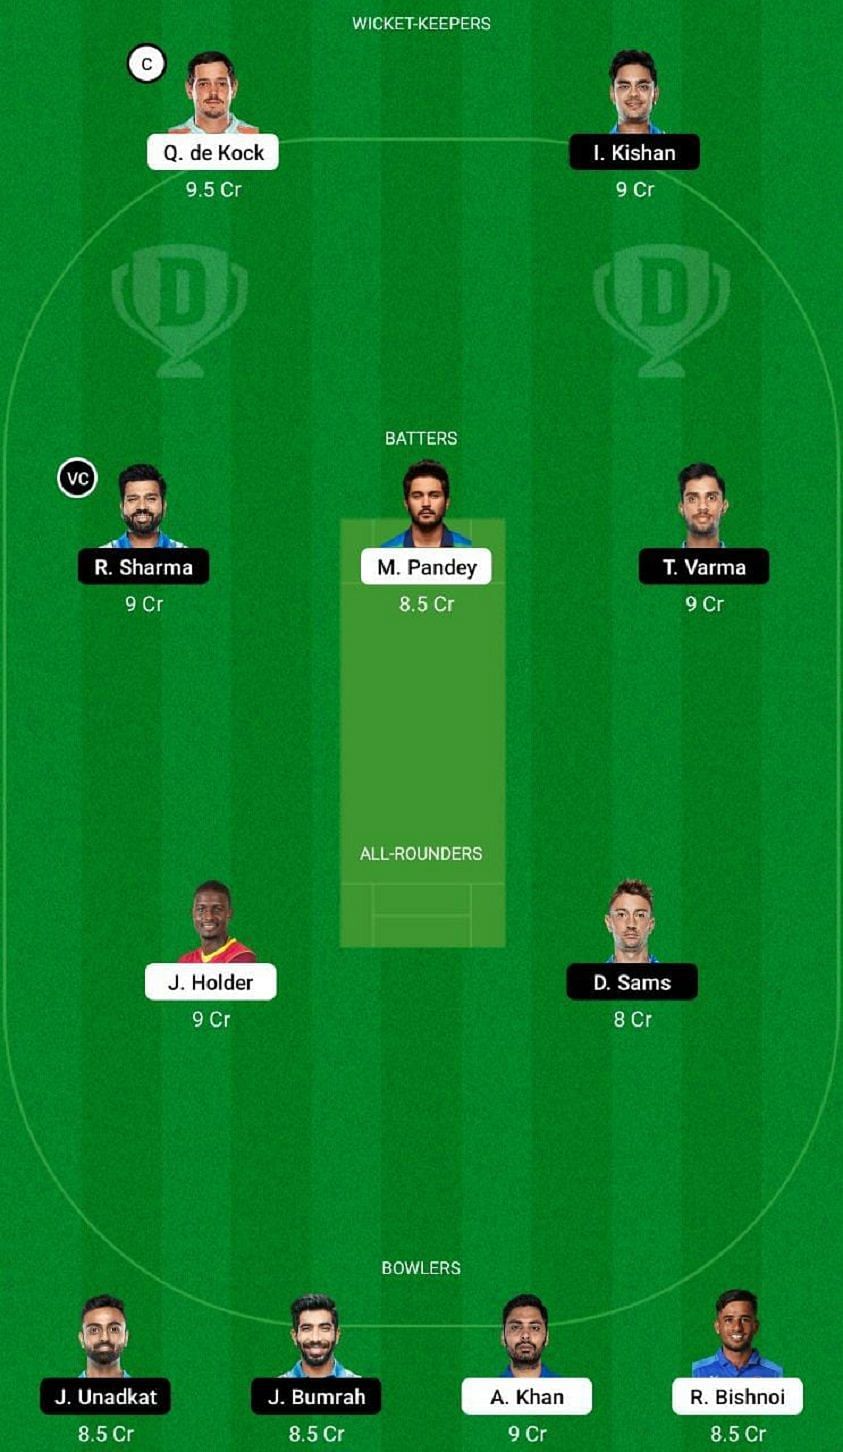 Lsg Vs Mi Dream11 Prediction Fantasy Cricket Tips Todays Playing 11 And Pitch Report For Ipl 